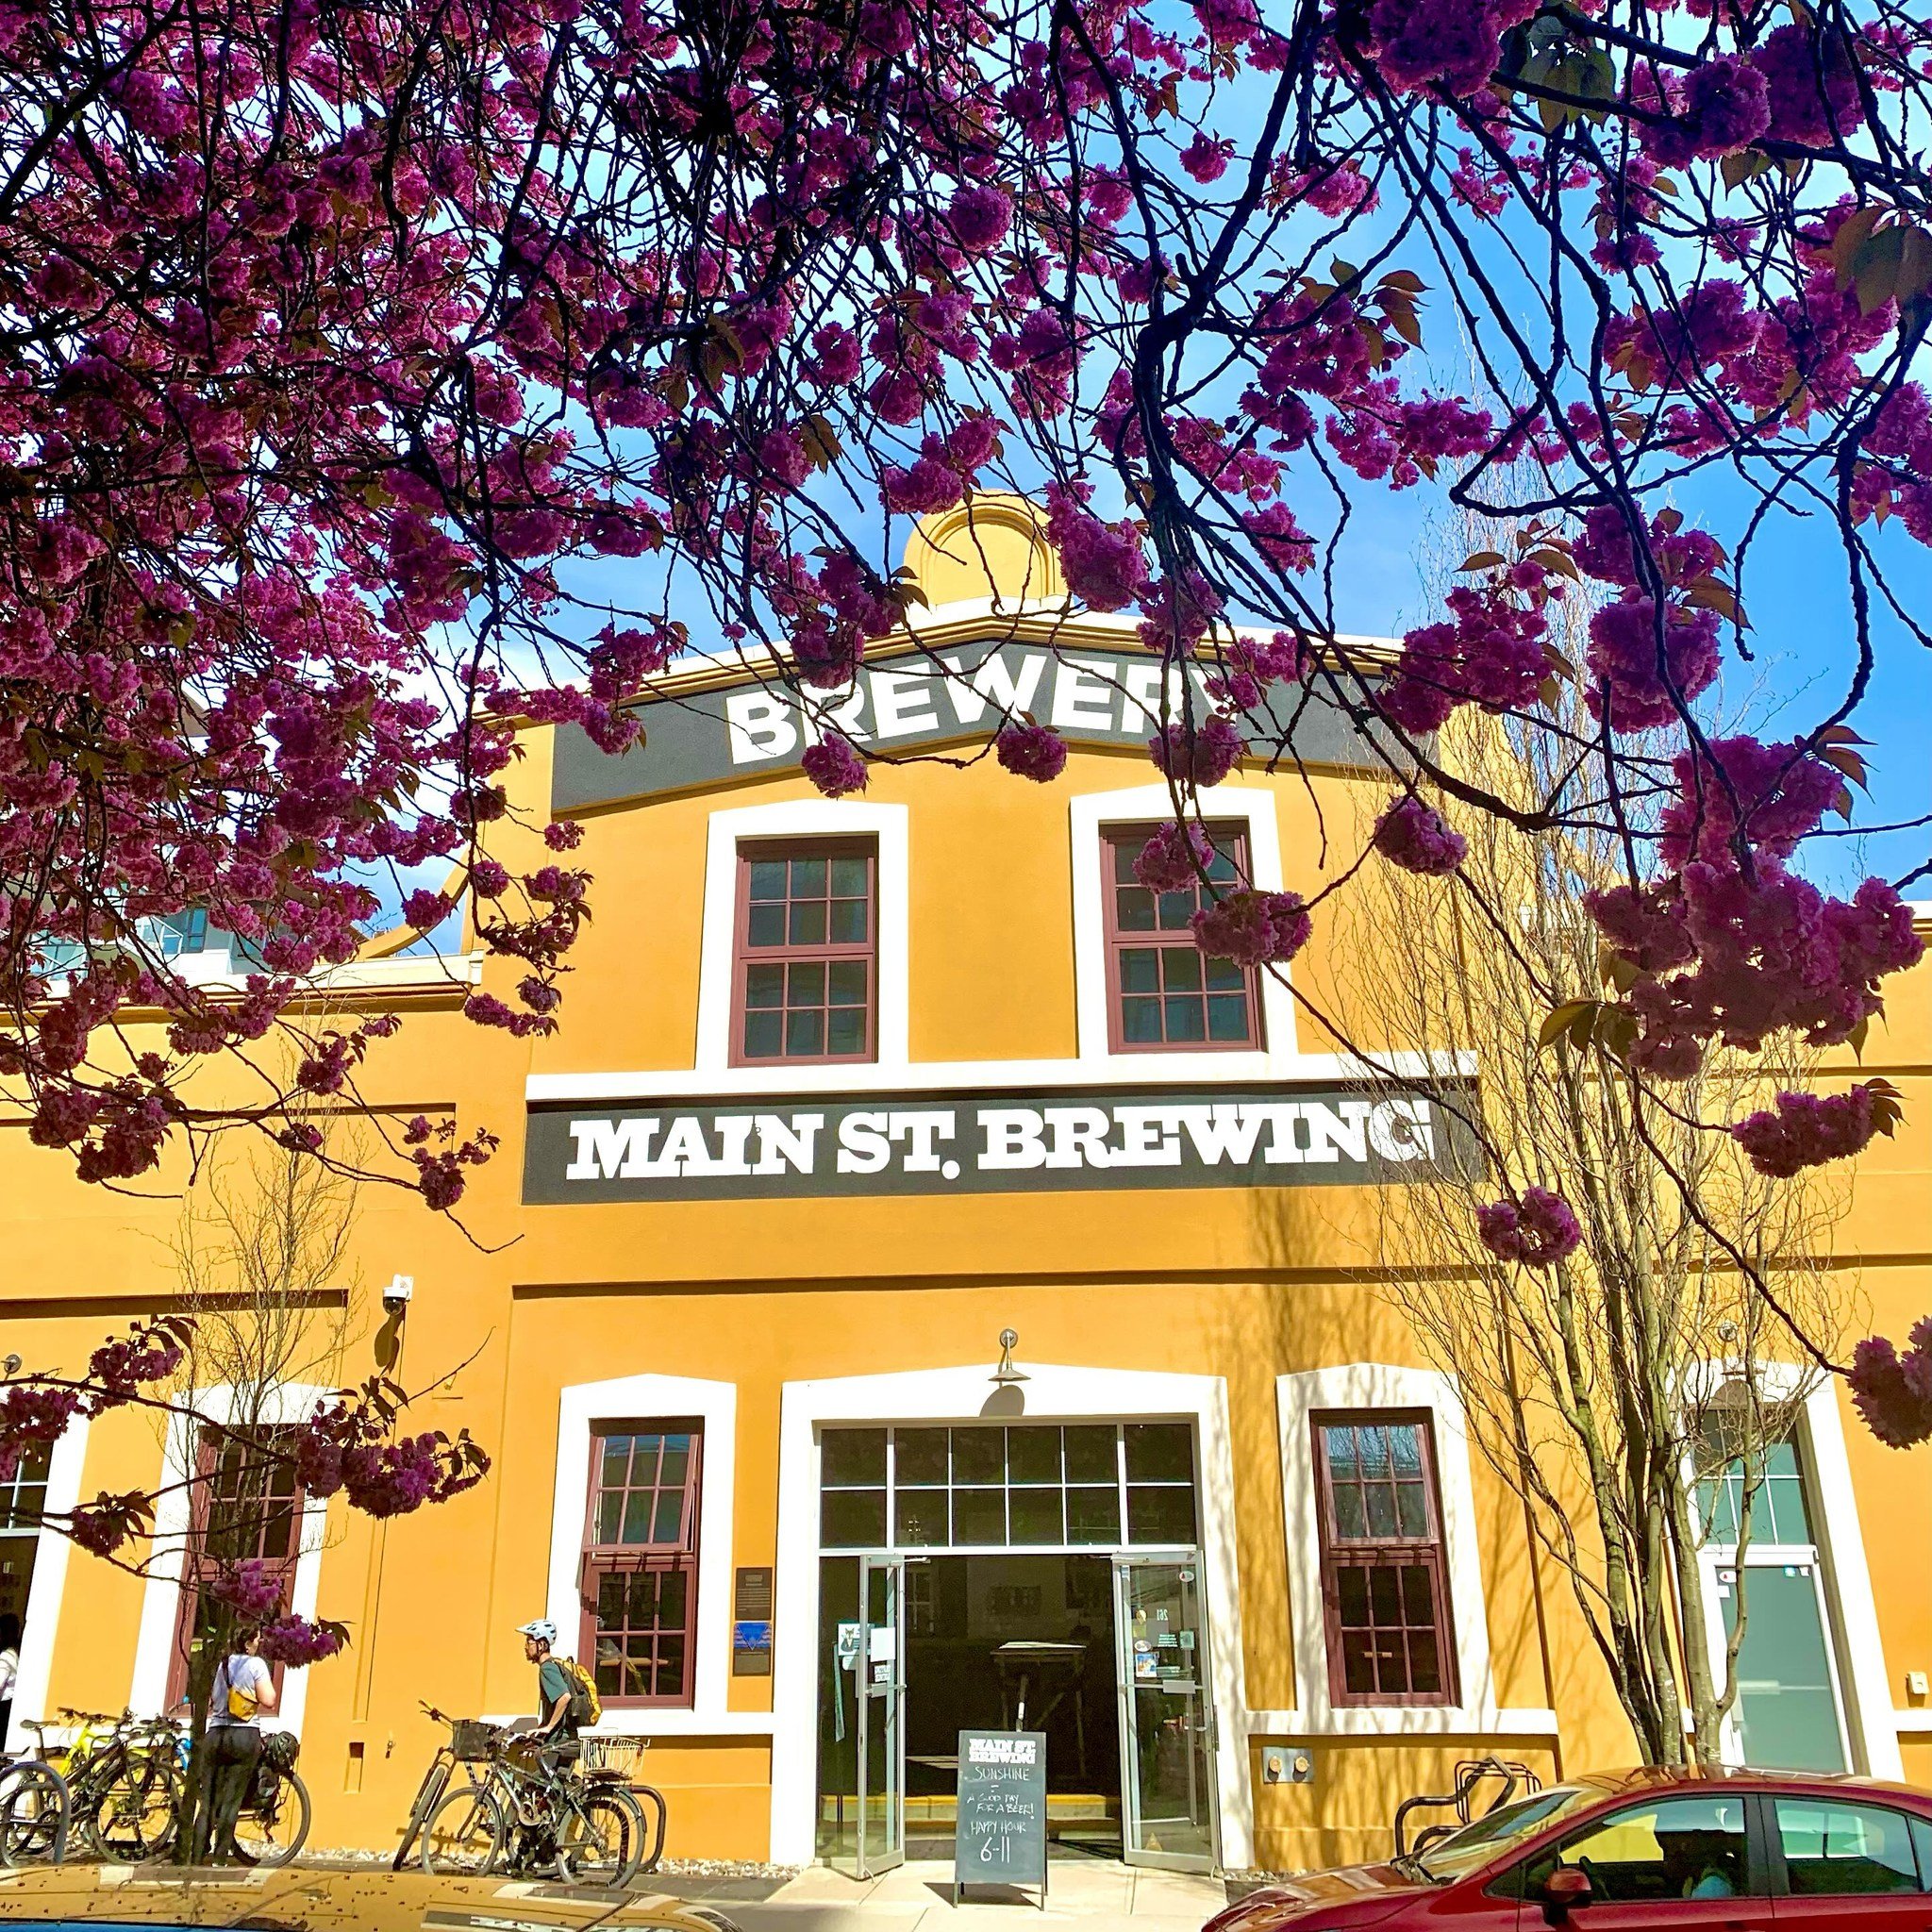 IN BLOOM

Cherry of a day out there. Get out and get after it.

Happy Hour in effect until 6 p.m. today and from 6 p.m. to close Saturday and Sunday. Patio? WHY YES.

Bring sunscreen. Bring pups. Be thirsty.

🌸🍻🌞🕶️❤️

#mainstreetbeer #beerstagram